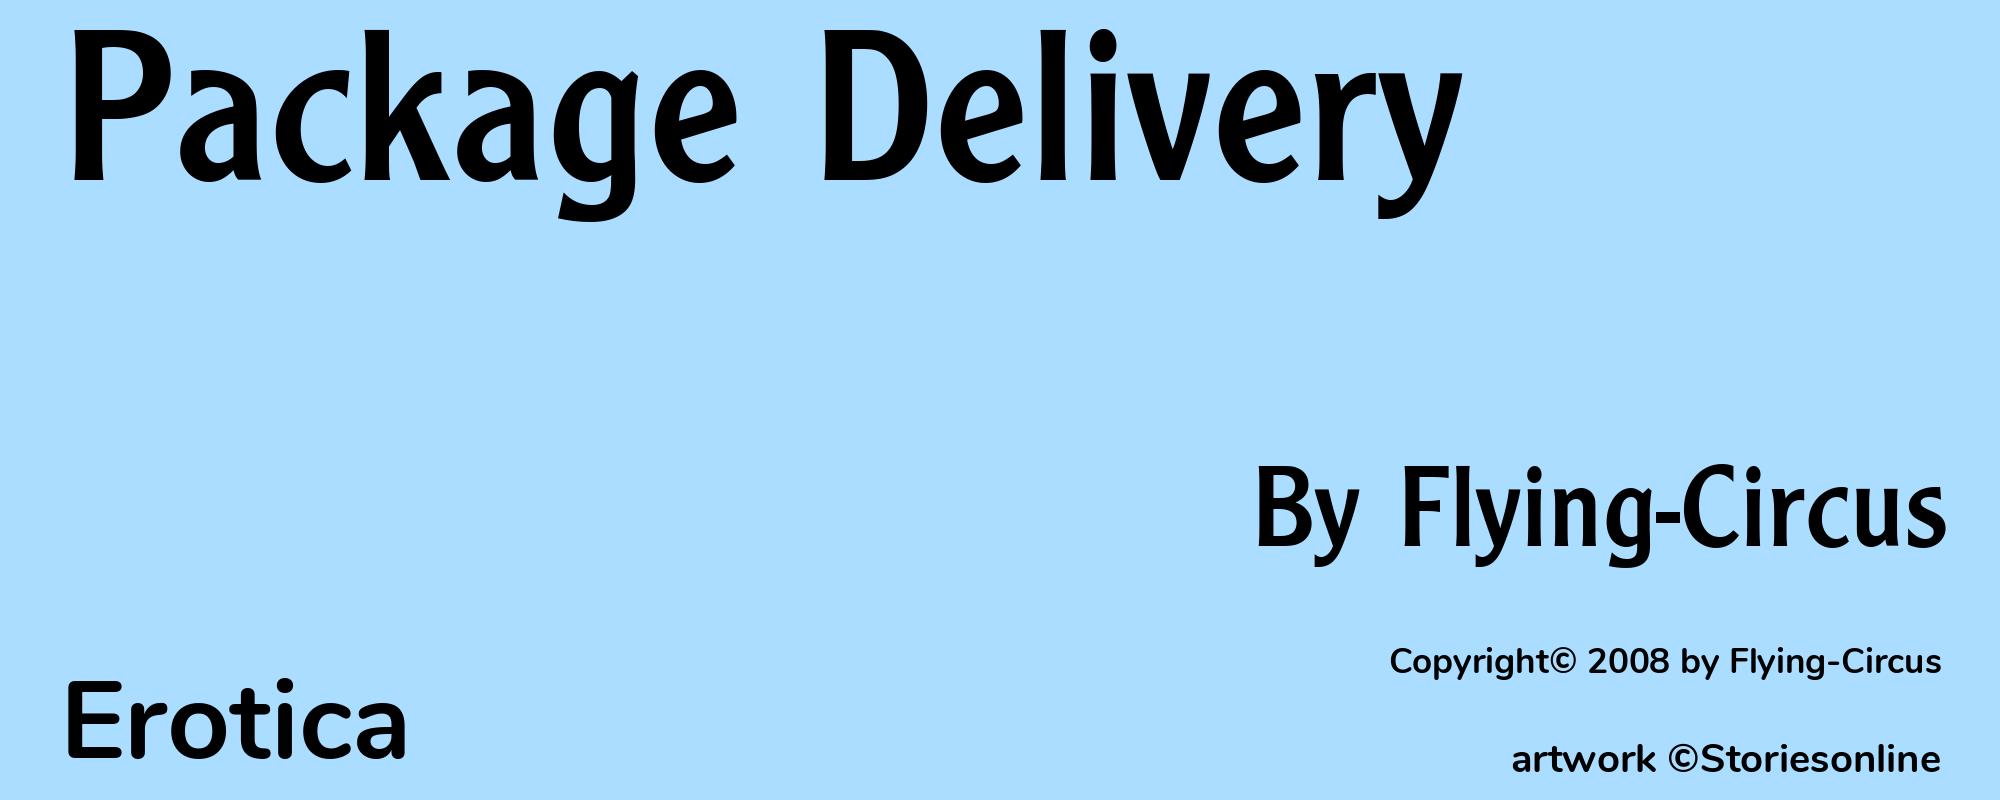 Package Delivery - Cover